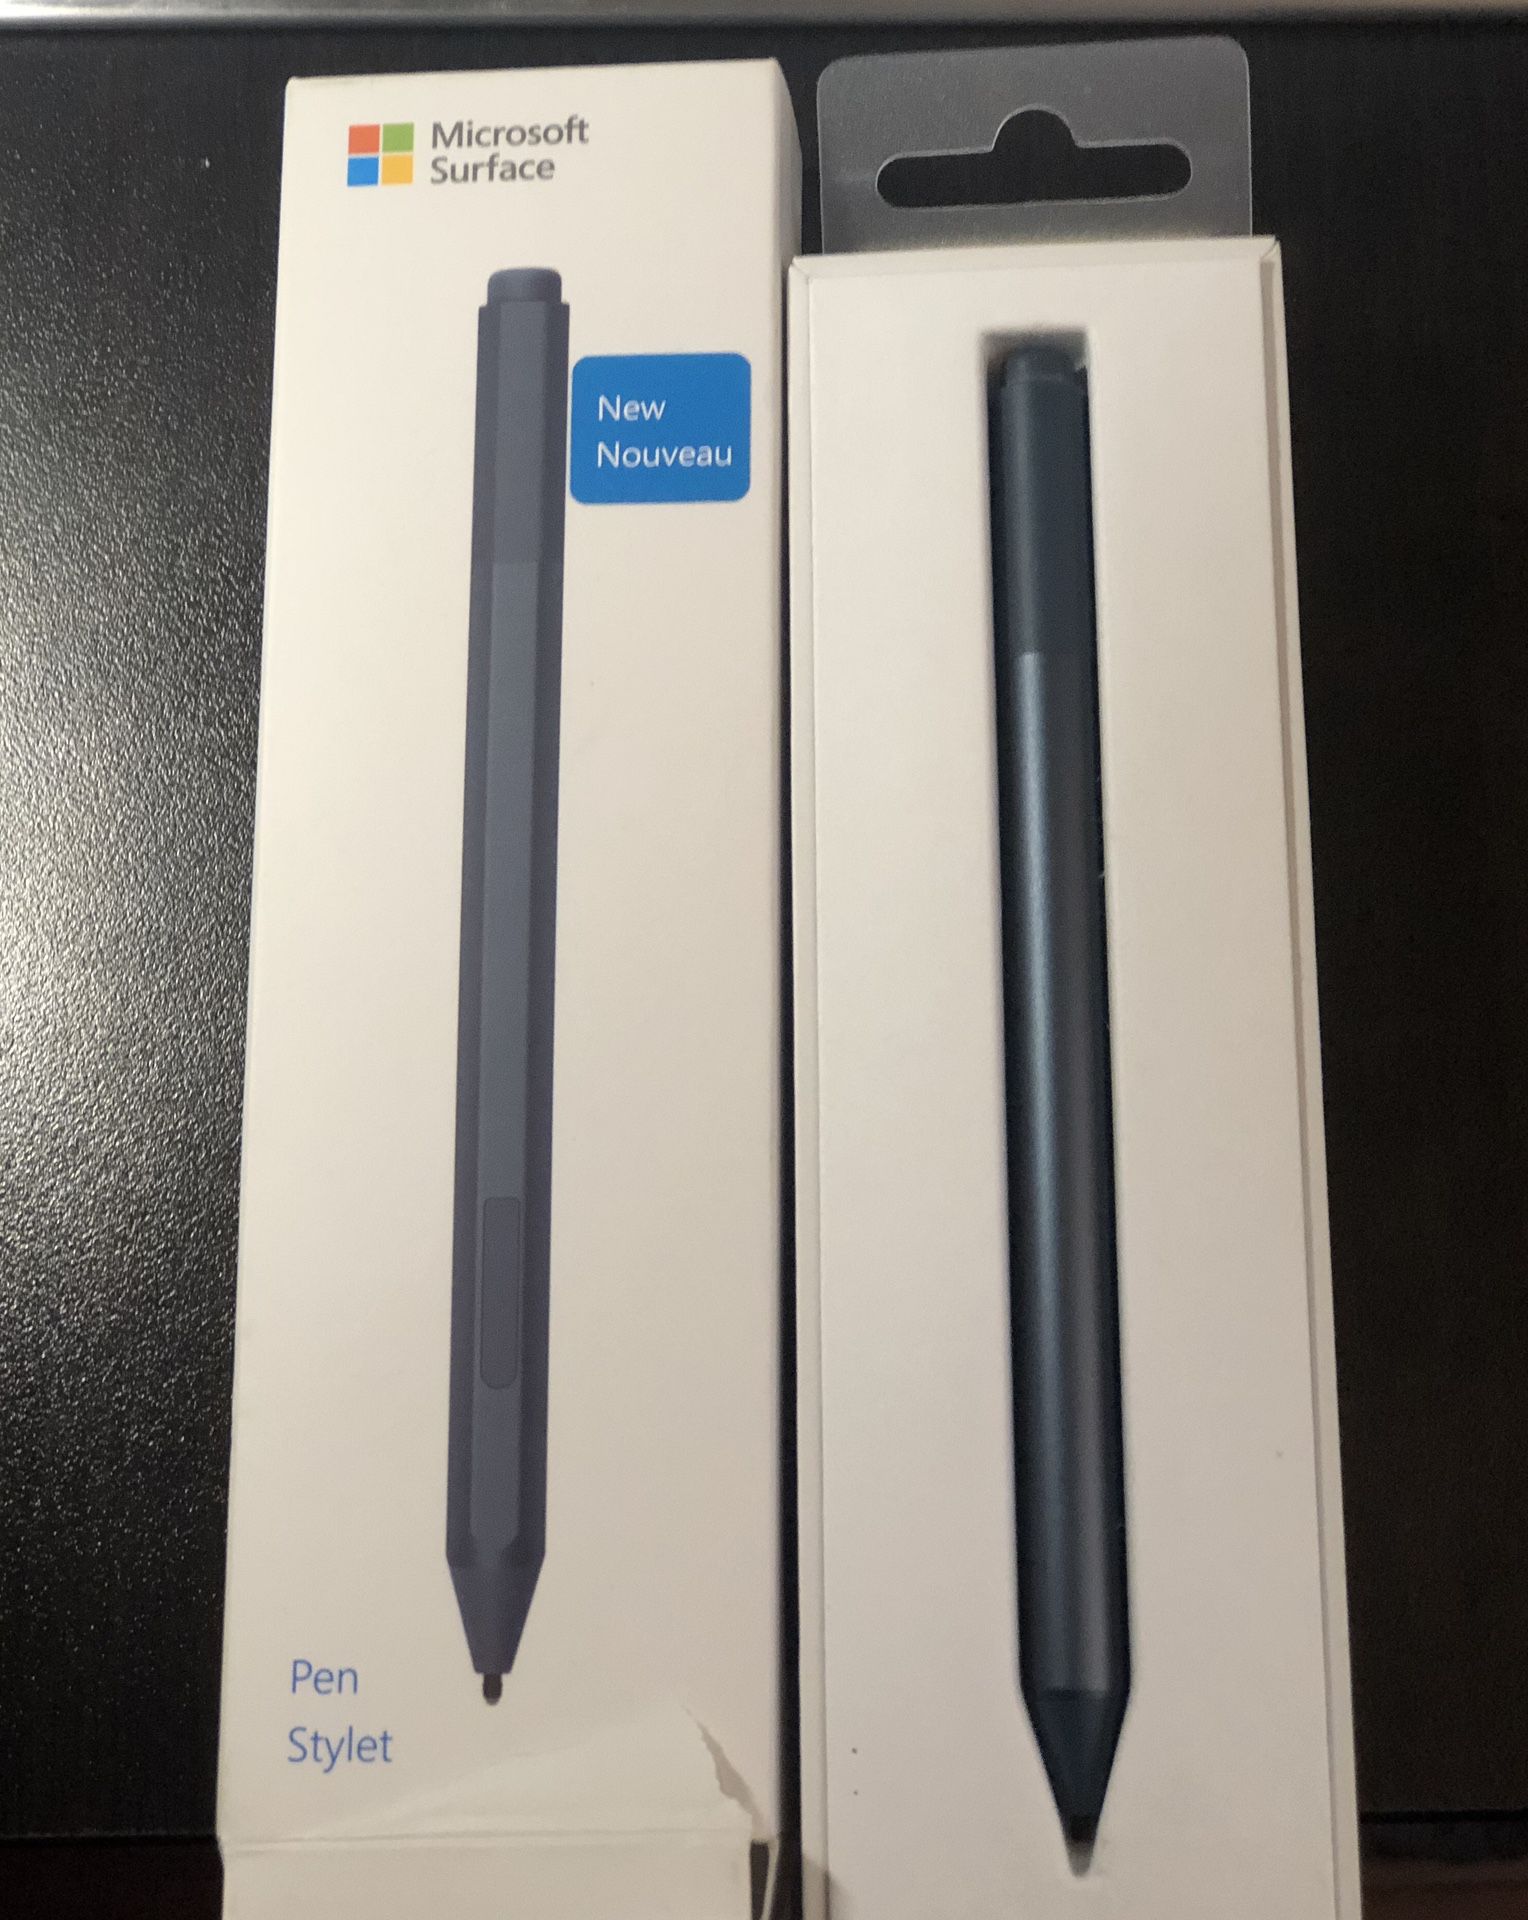 Microsoft Surface Pen - Stylet for sale